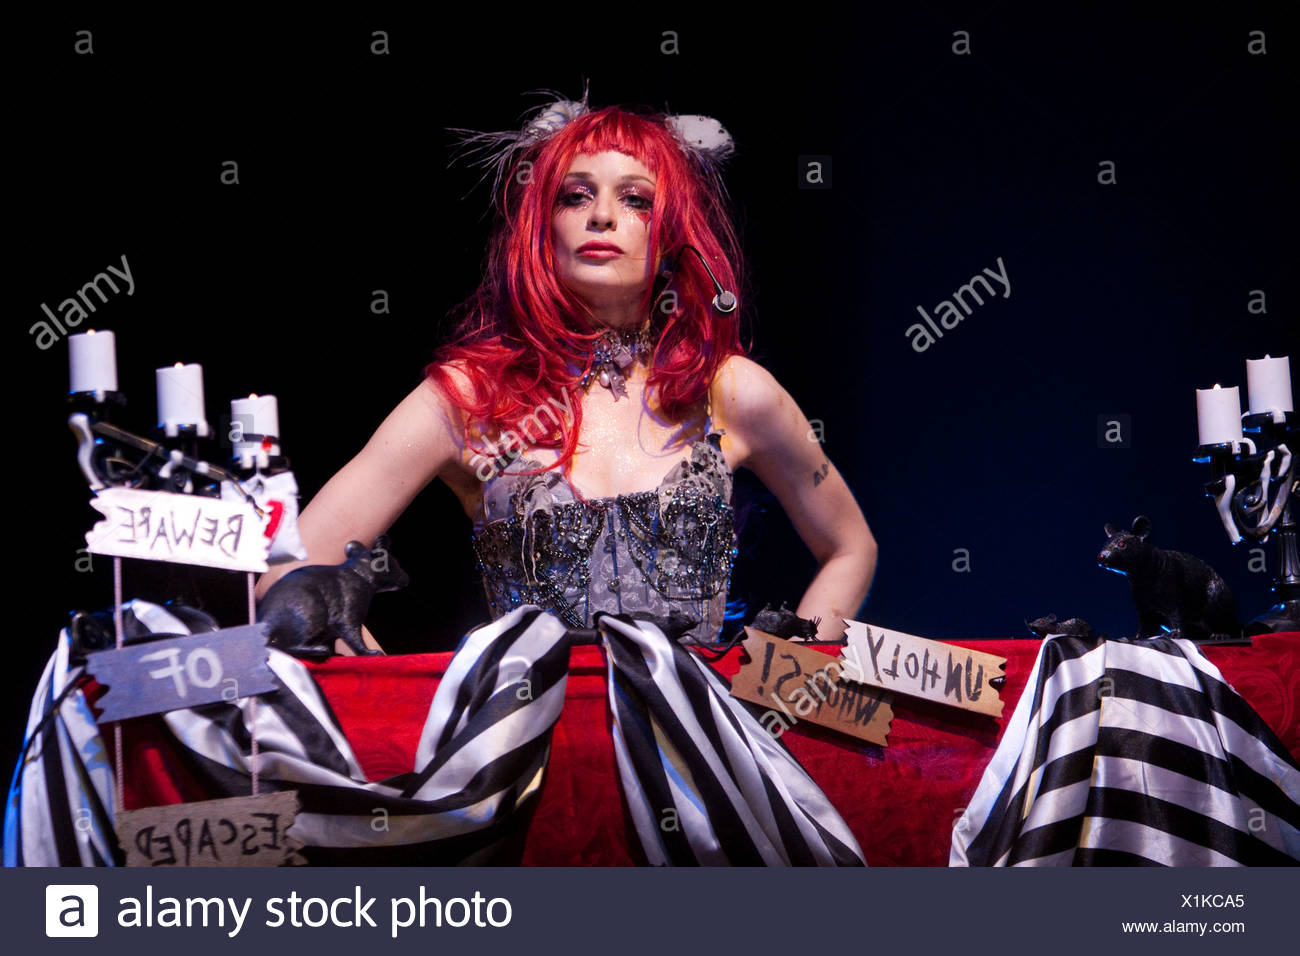 American Musician Lyricist Songwriter Singer And Author Emilie Autumn Performing Live At Her Only Swiss Concert In Club Haer Stock Photo Alamy